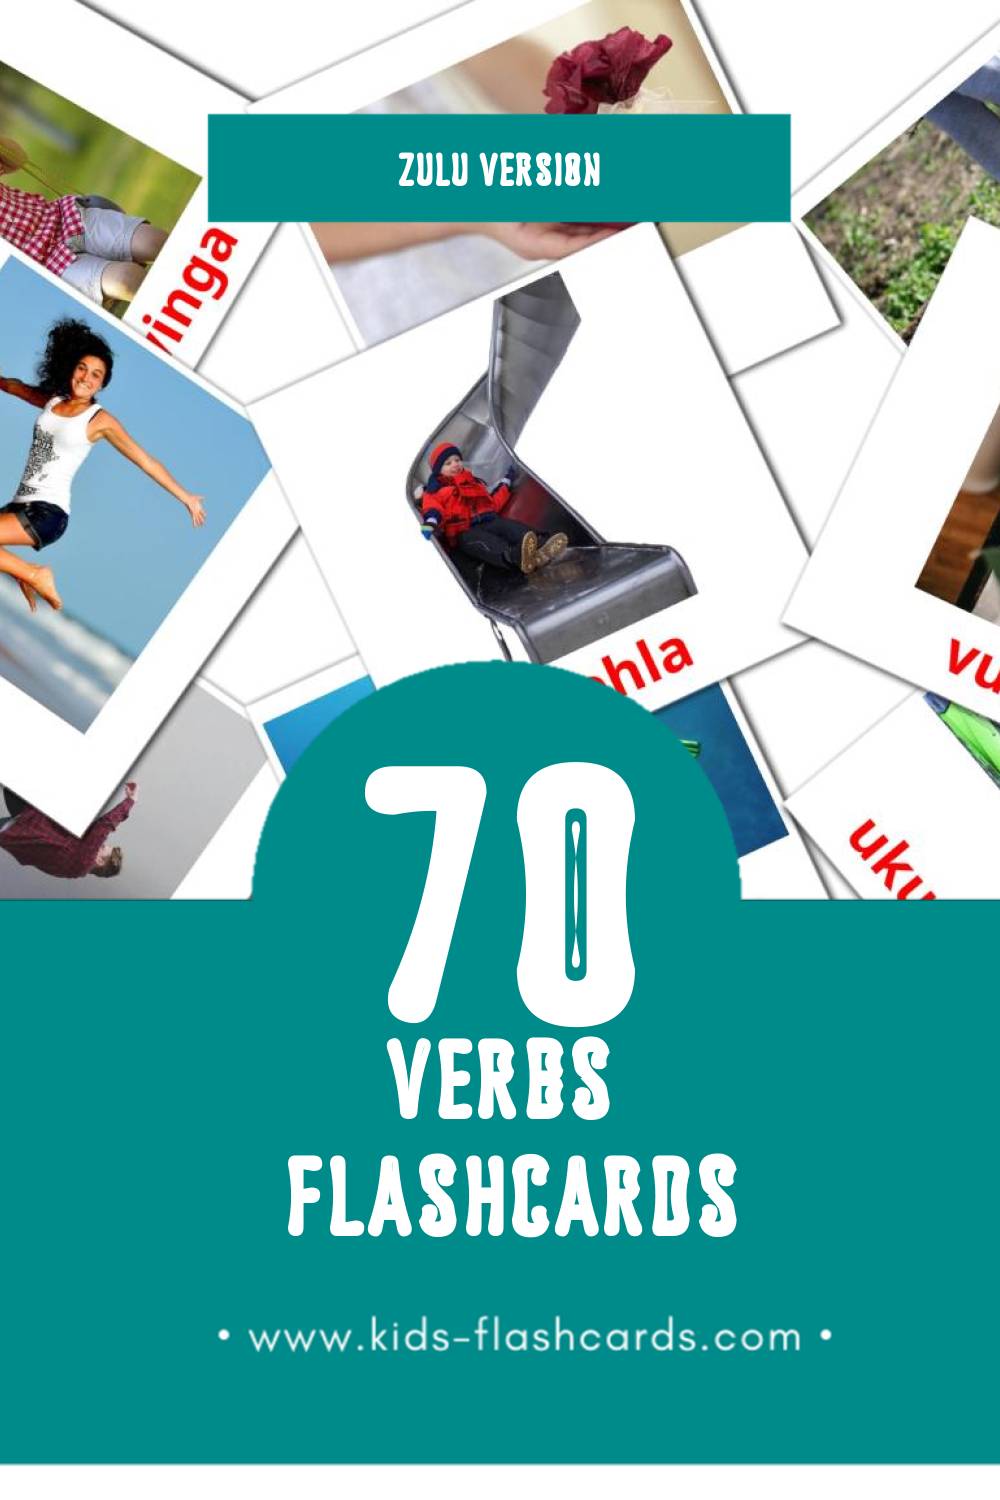 Visual Izenzo  Flashcards for Toddlers (76 cards in Zulu)